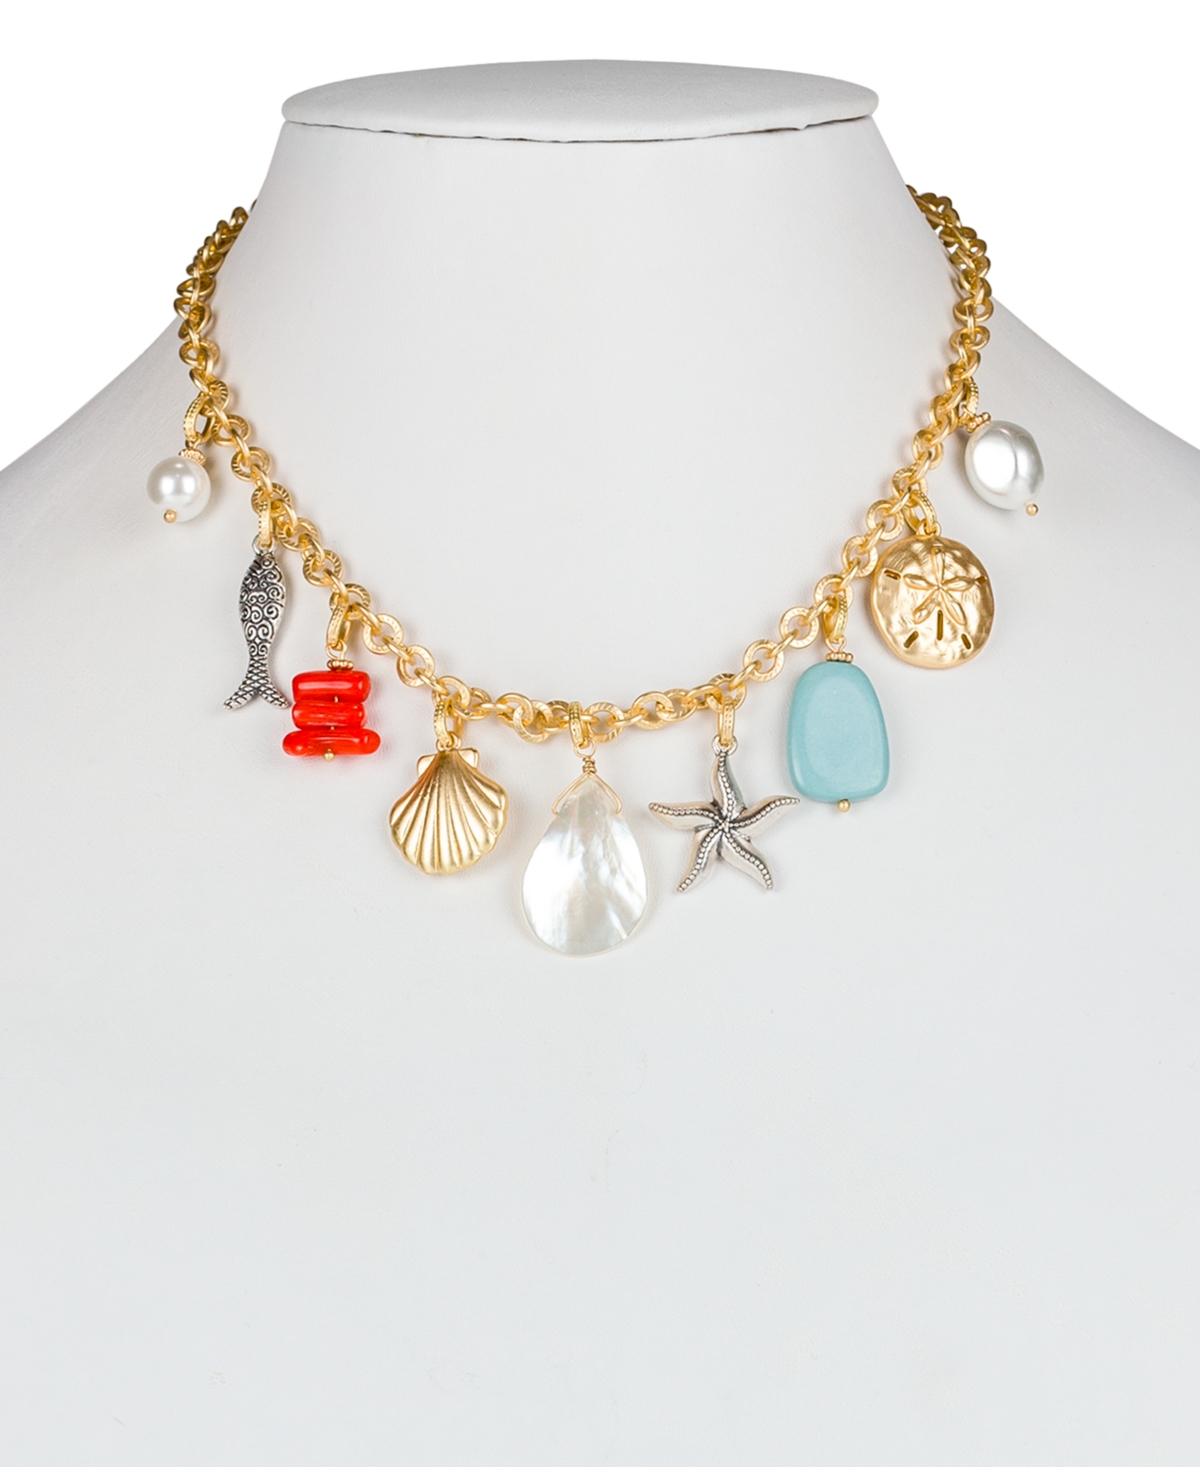 Shop Patricia Nash Gold-tone Mixed Stone Seashore Charm Statement Necklace, 16" + 3" Extender In Egyp Gold